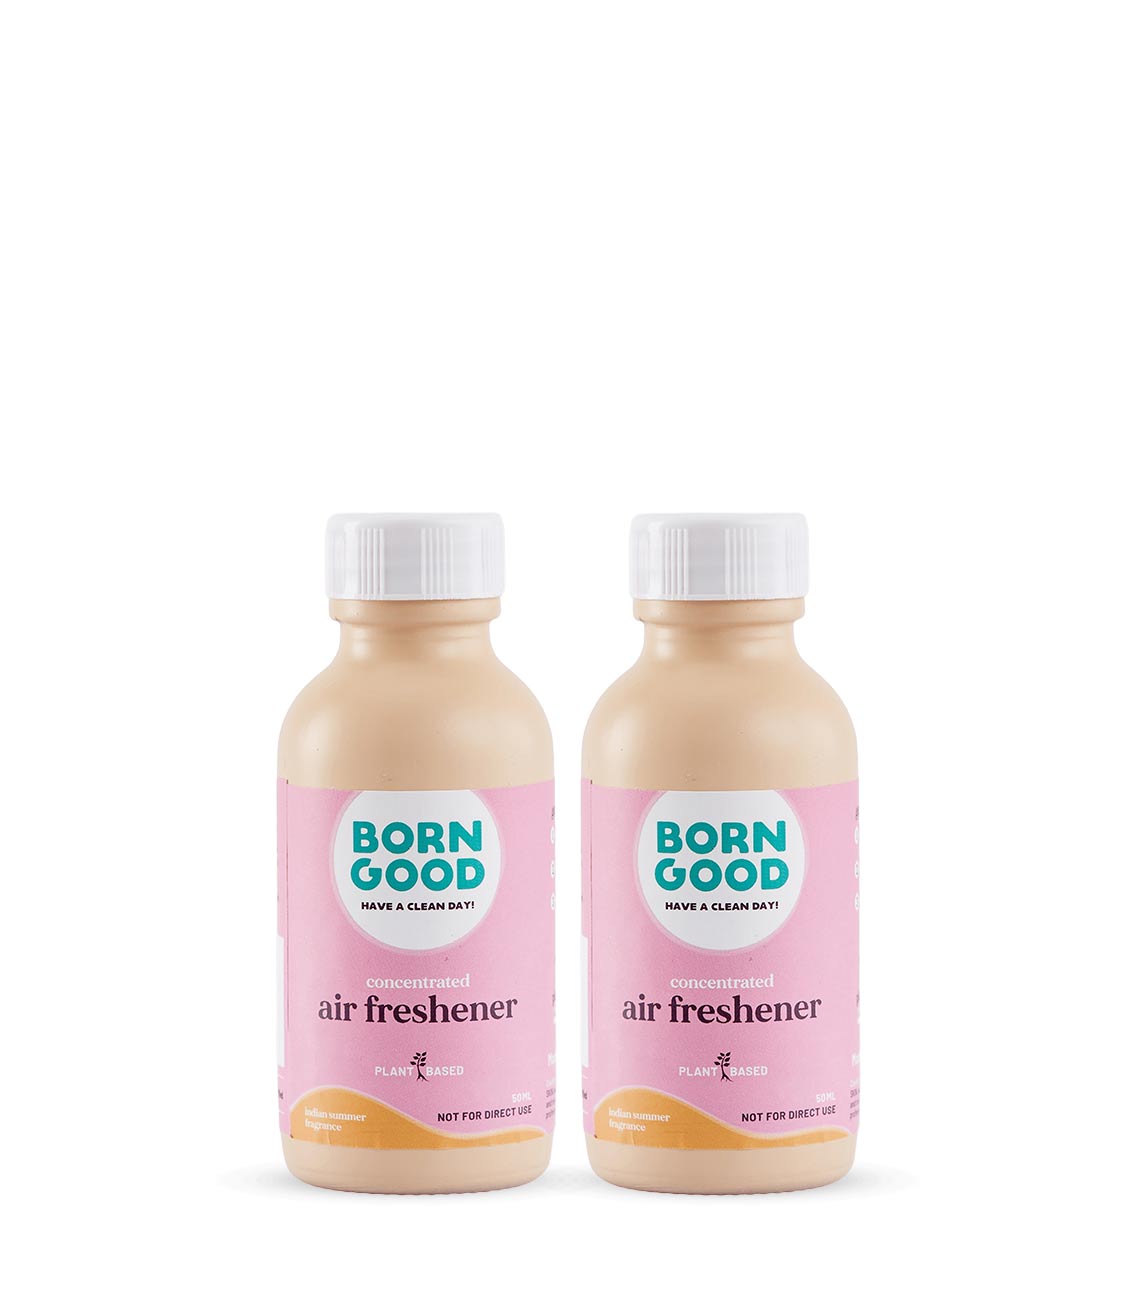 Born Good Plant-based Air Freshener (Indian Summer) Concentrate 50ml x 2 (Makes 1 L)